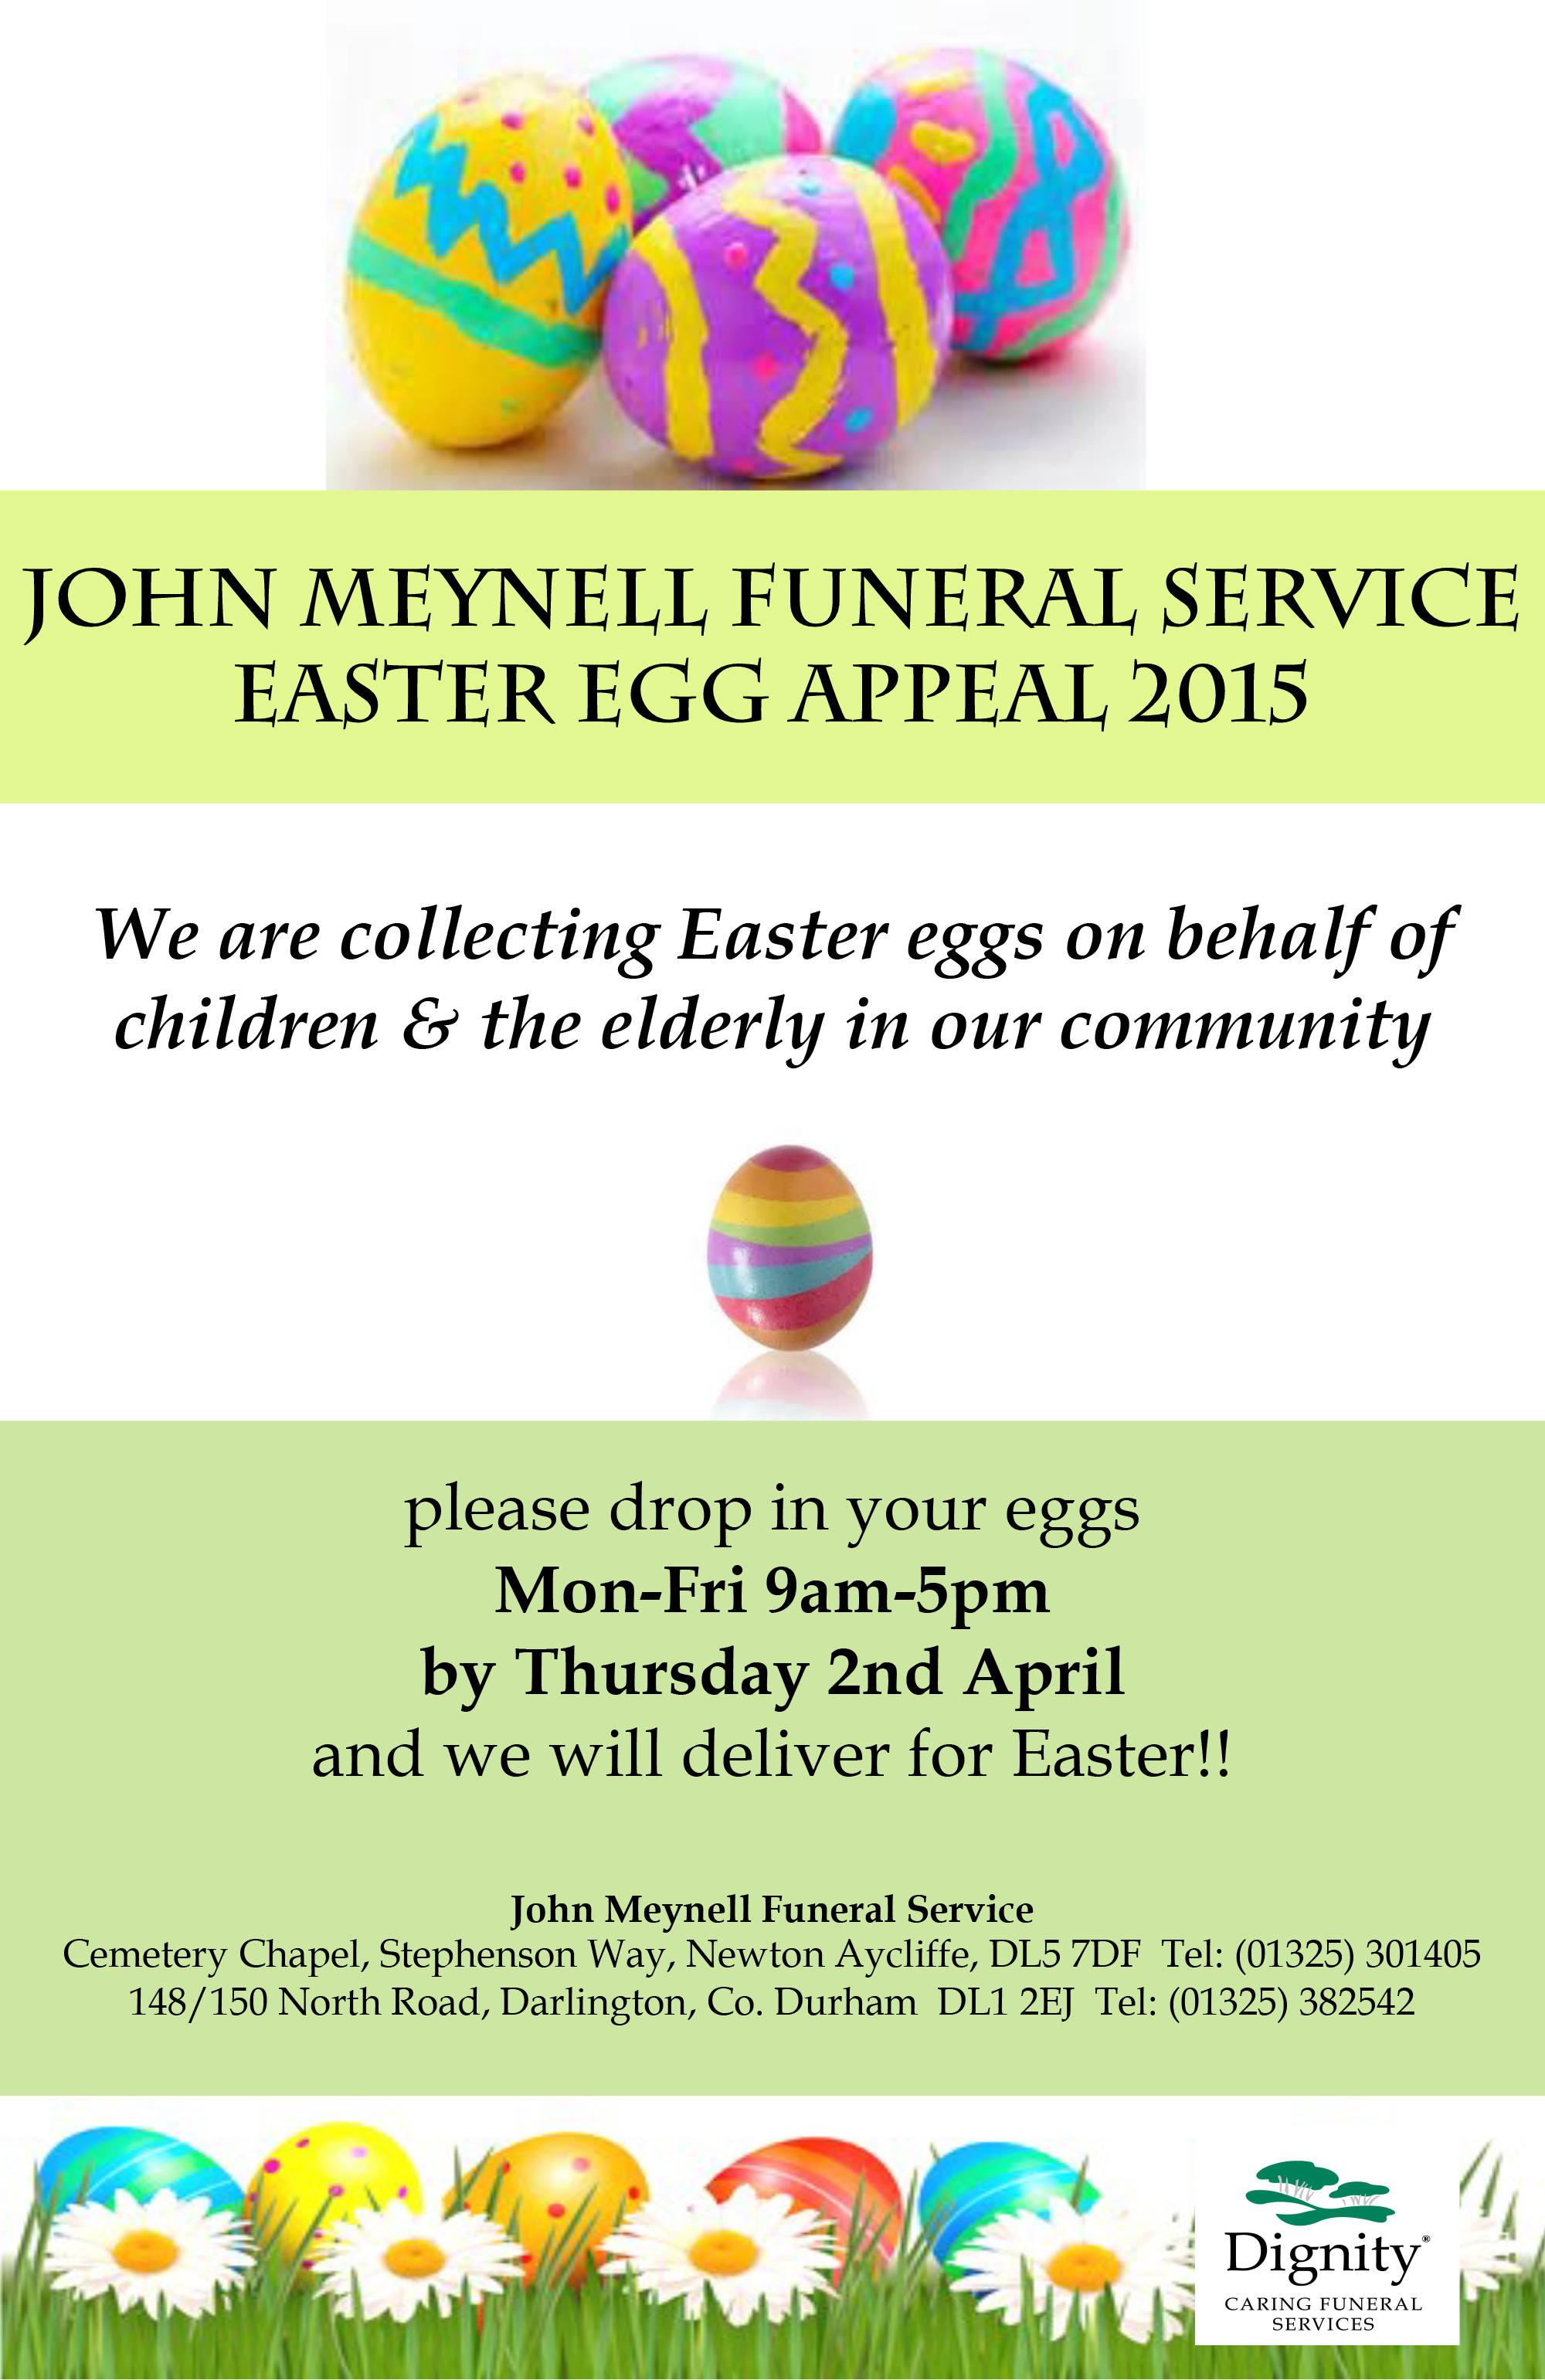 Local Funeral Director’s Easter Egg Challenge